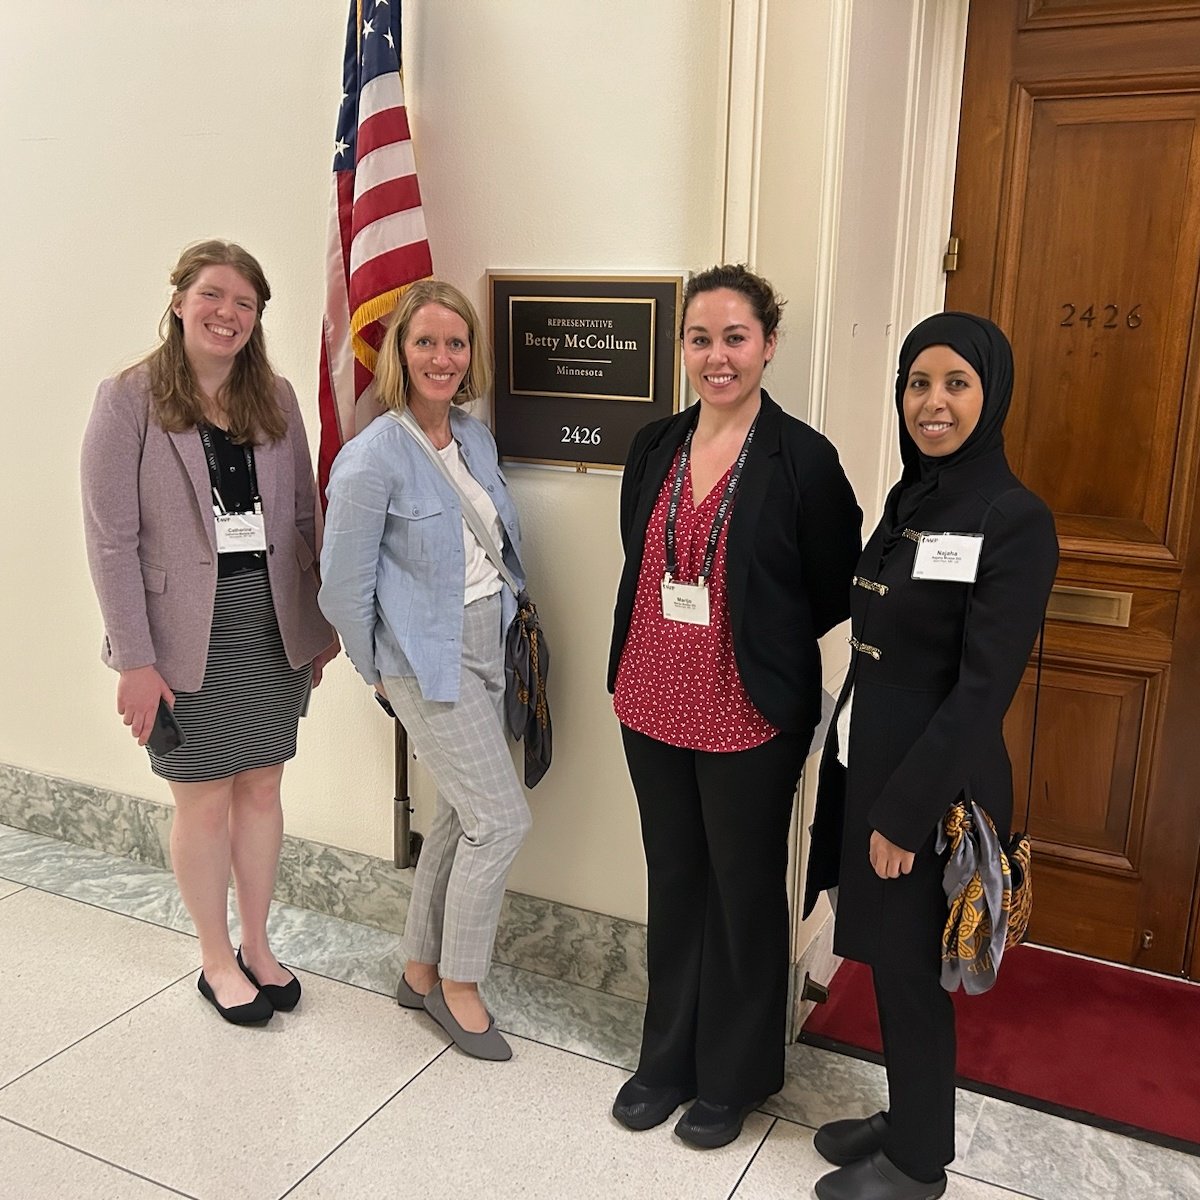 Outside Rep. @BettyMcCollum04's office, ready to advocate for policies that address med student debt, improve vaccination uptake & dismantle barriers to #primarycare for patients. #FMAS2024 #MAFPAdvocacy